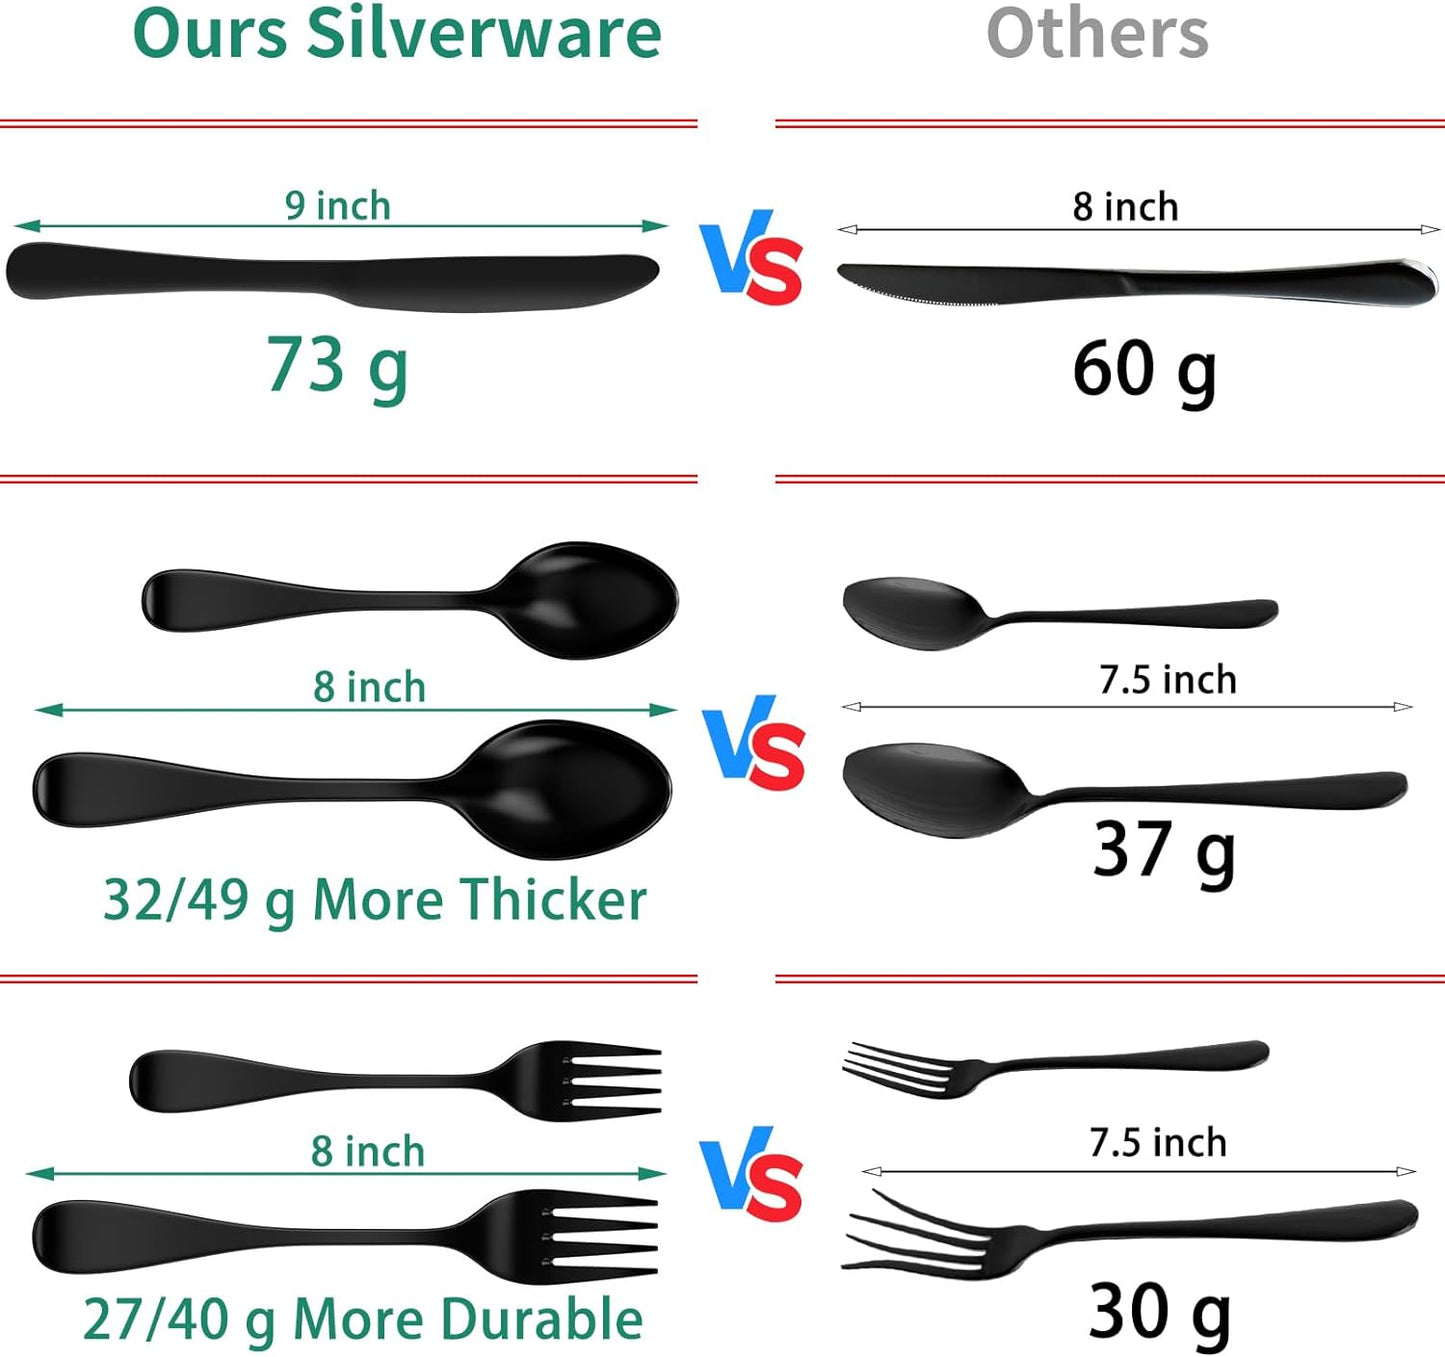 49-Piece Black Silverware Set with Drawer Organizer, Stainless Steel Cutlery for 8 with Matte Steak Knives, Forks, Spoons - Dishwasher Safe